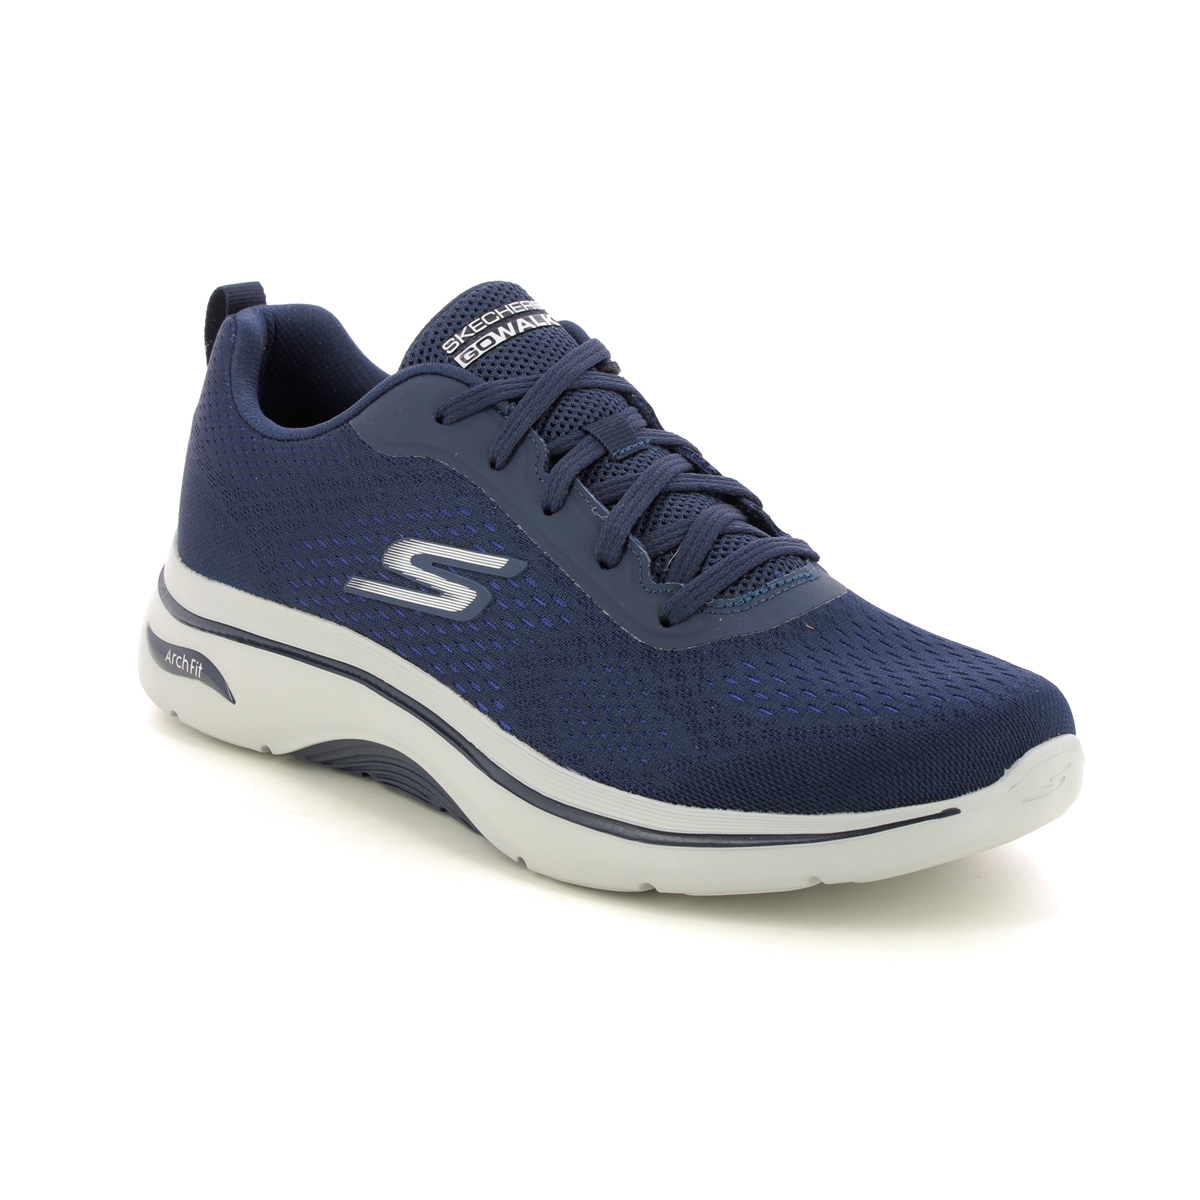 Skechers Arch Fit 2 Go Walk 7 NVY Navy Mens trainers 216516 in a Plain Textile in Size 7